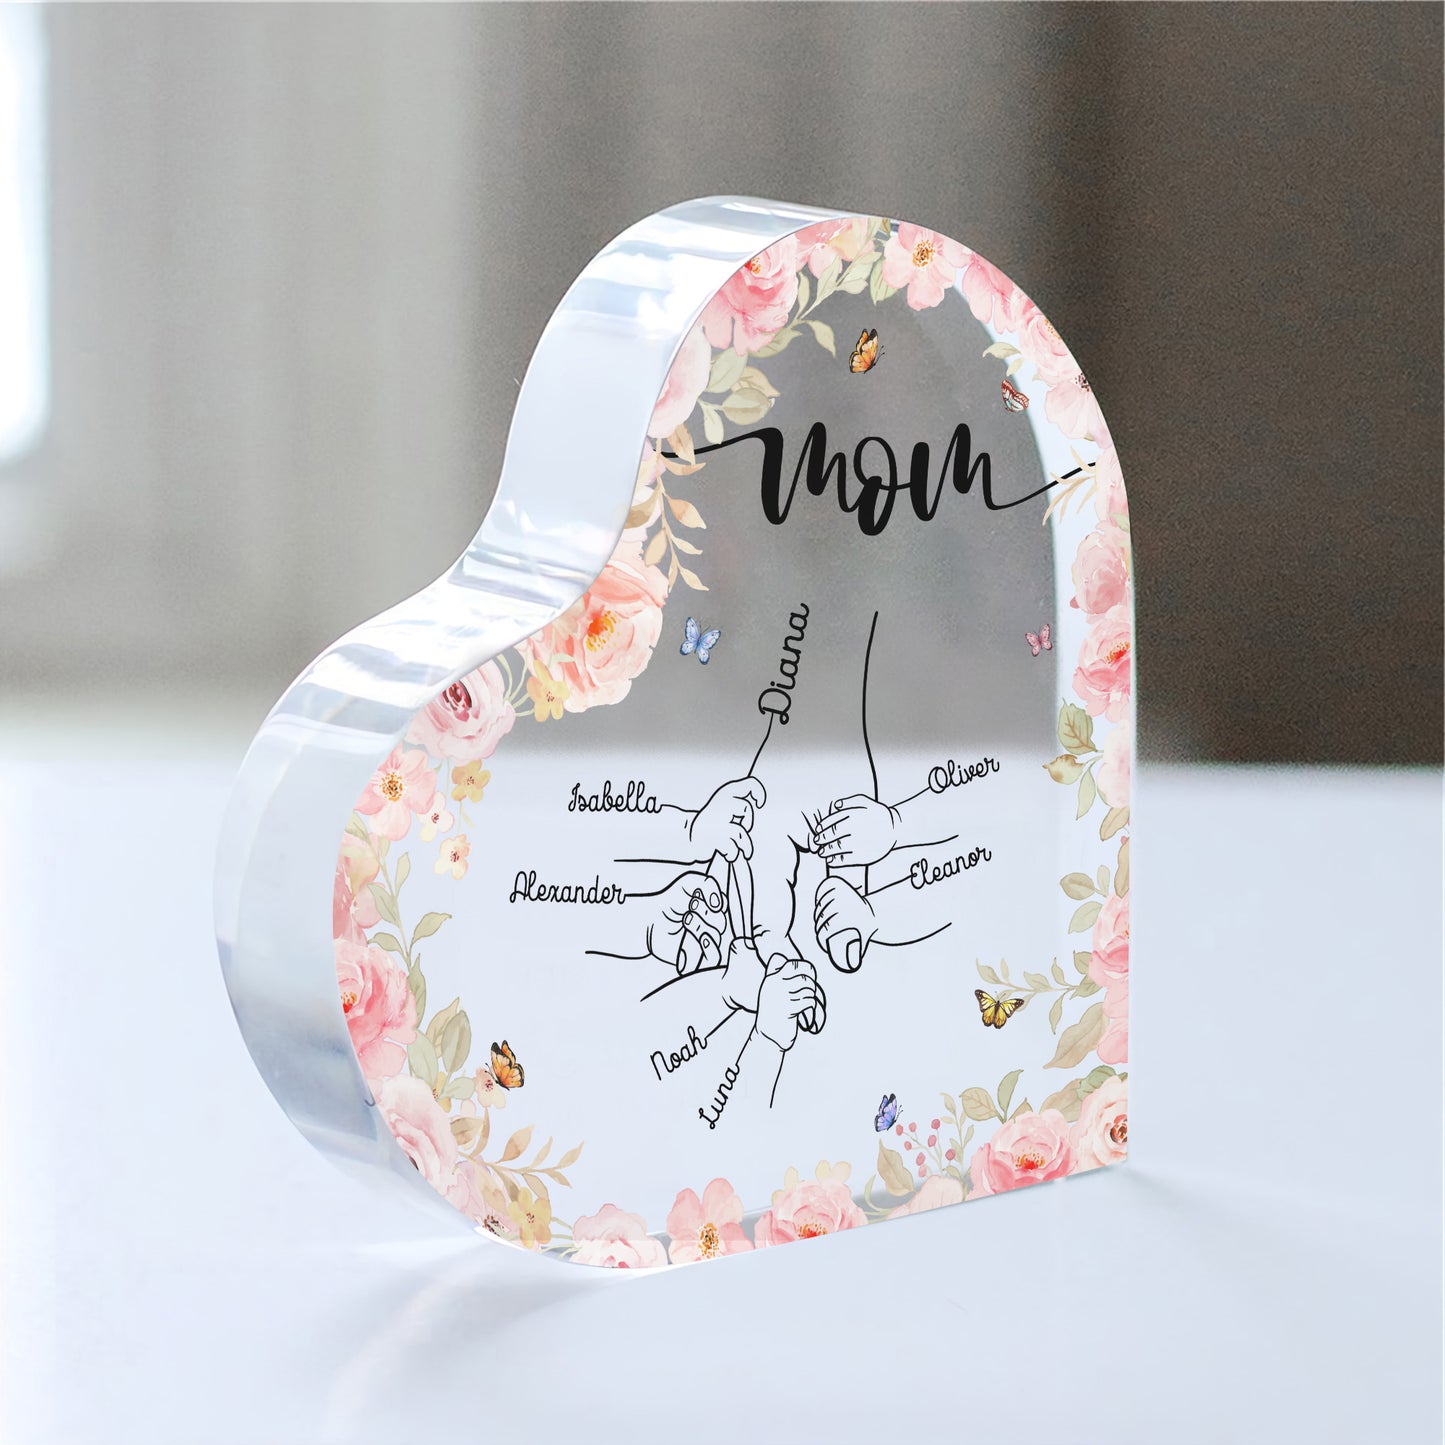 Family - Holding Mom's Hand - Personalized Acrylic Plaque